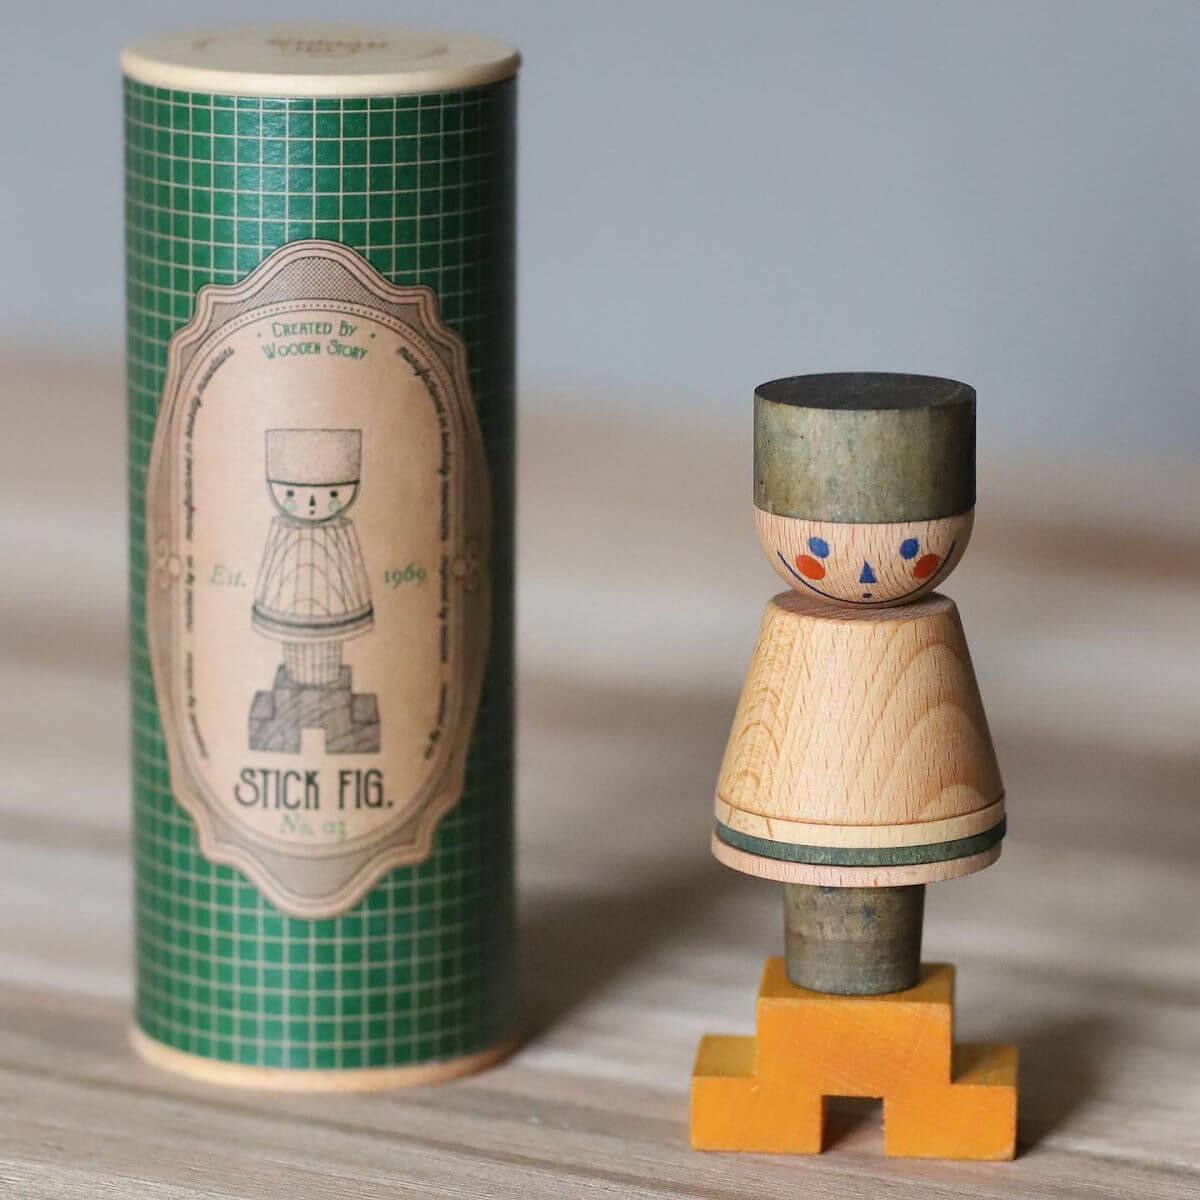 Stick Fig. No. 03 wooden stacking toy by Wooden Story